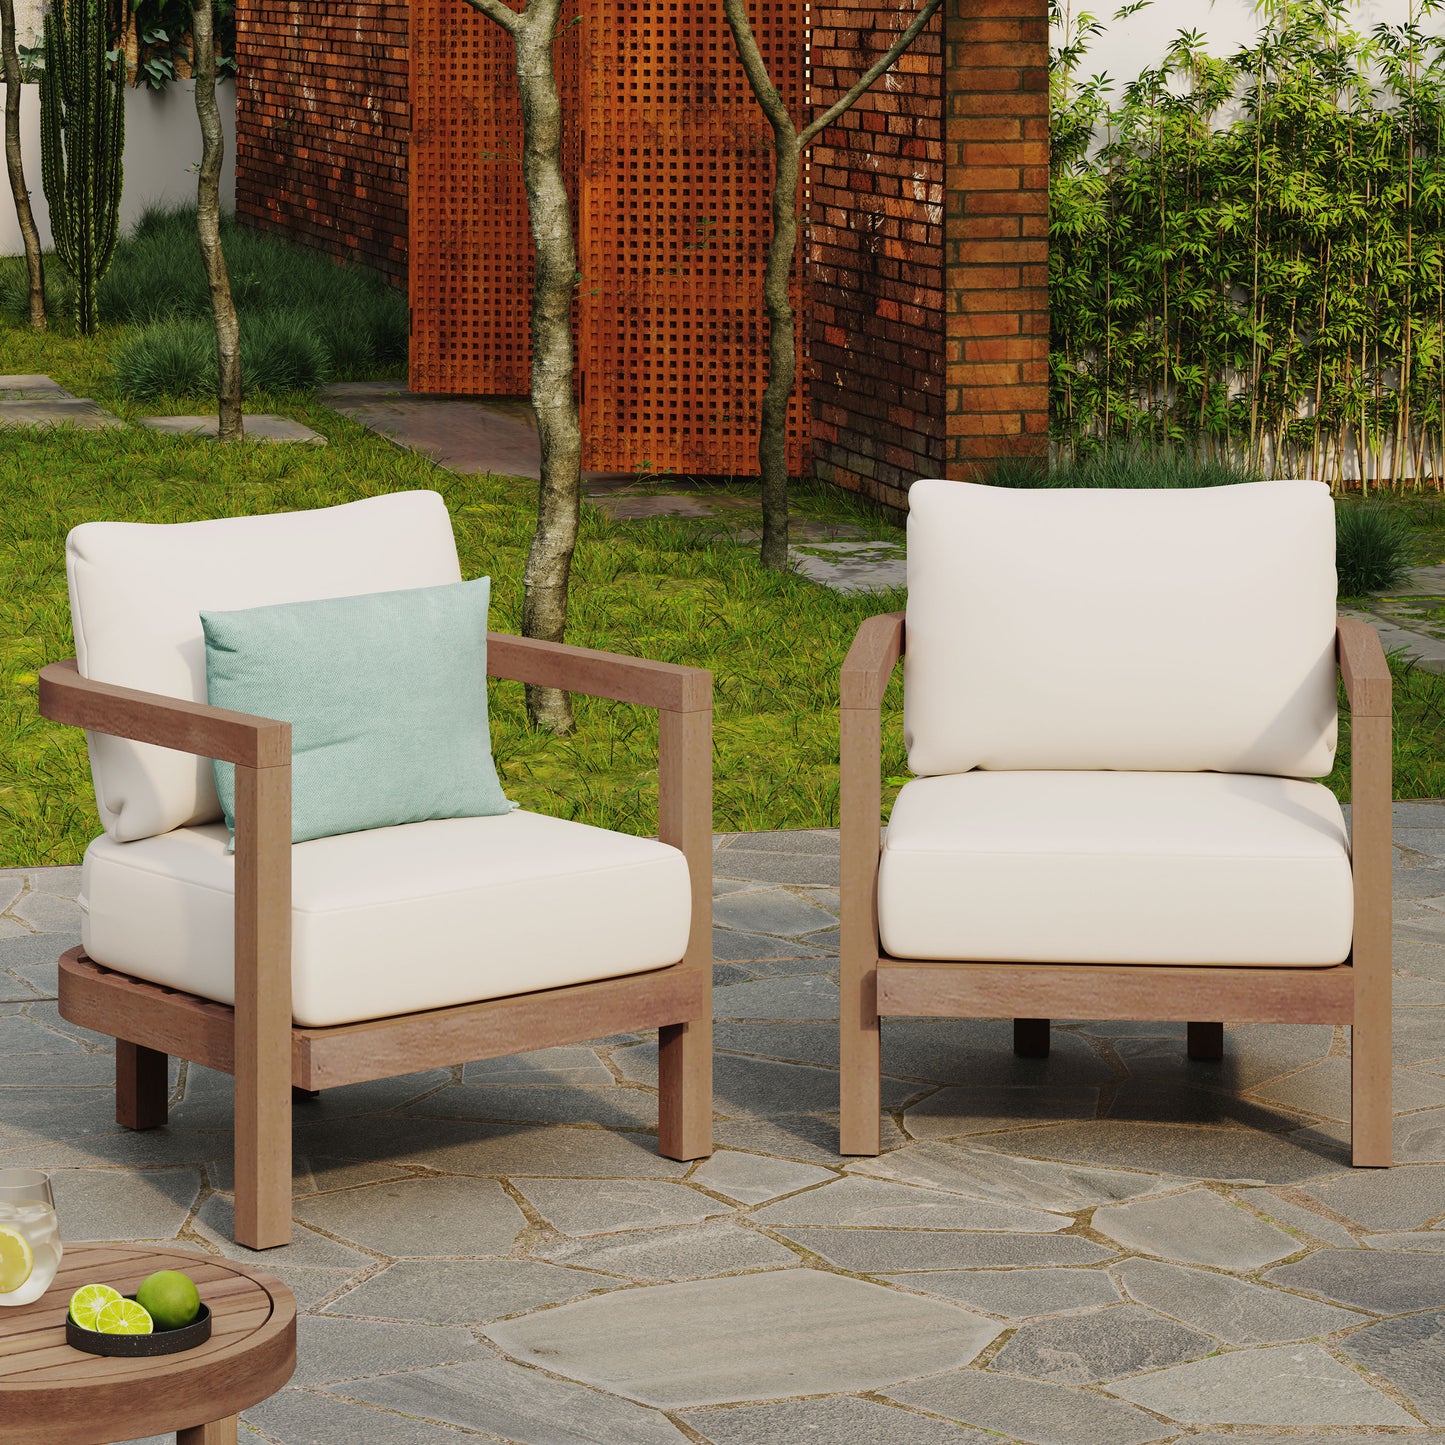 Aston Outdoor Acacia Wood Club Chairs with Cushions, Set of 2, Beige and Brown Wash